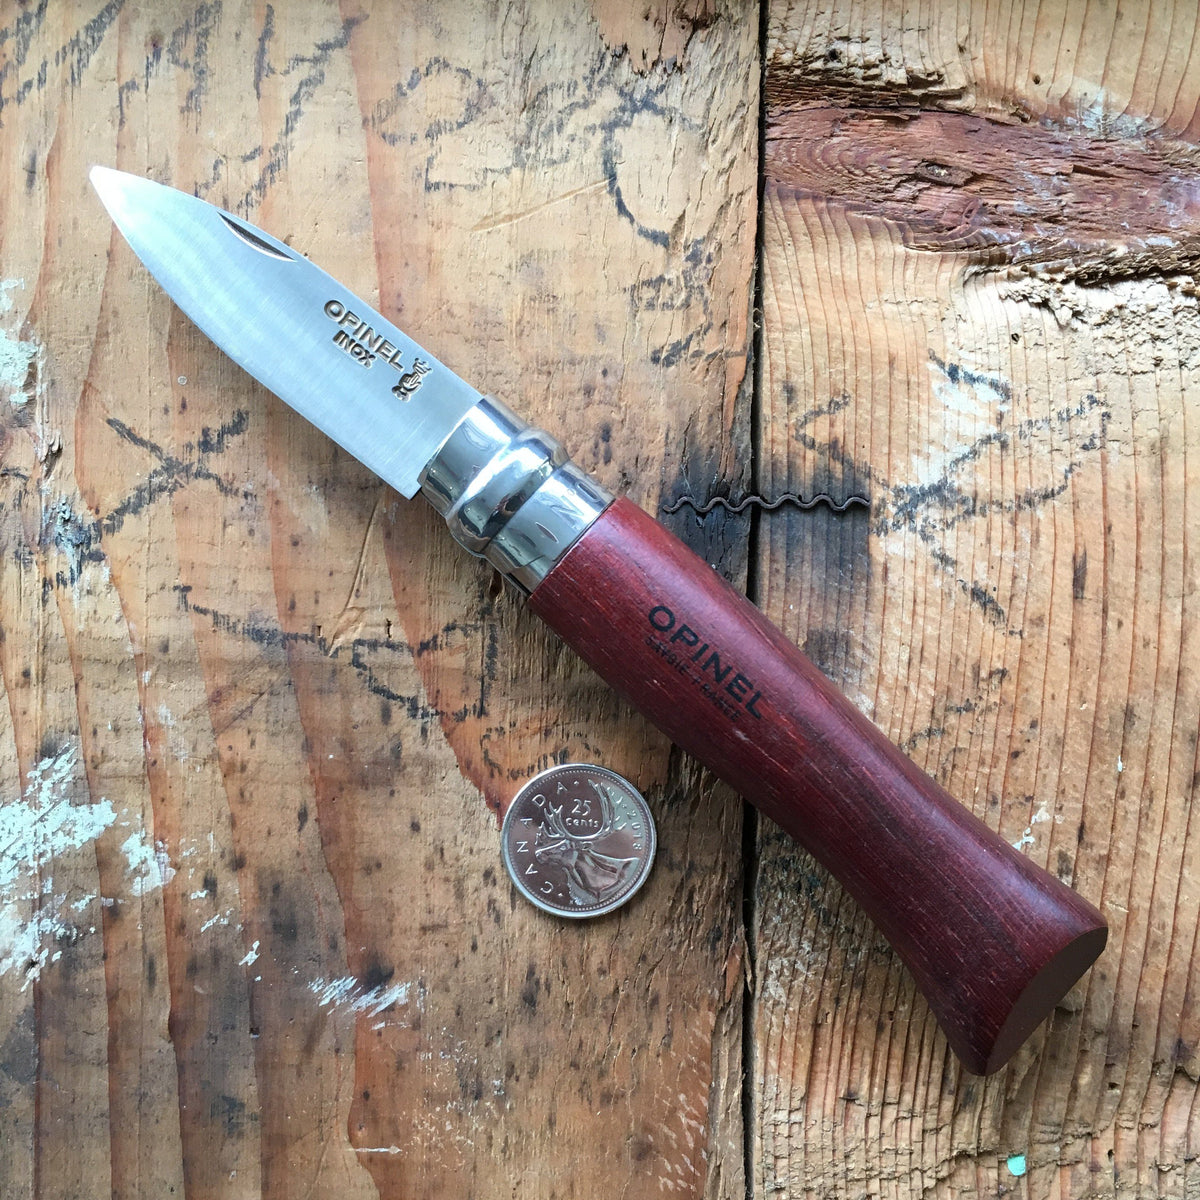 Opinel Inox No.09 Oyster and Shellfish Folding Knife